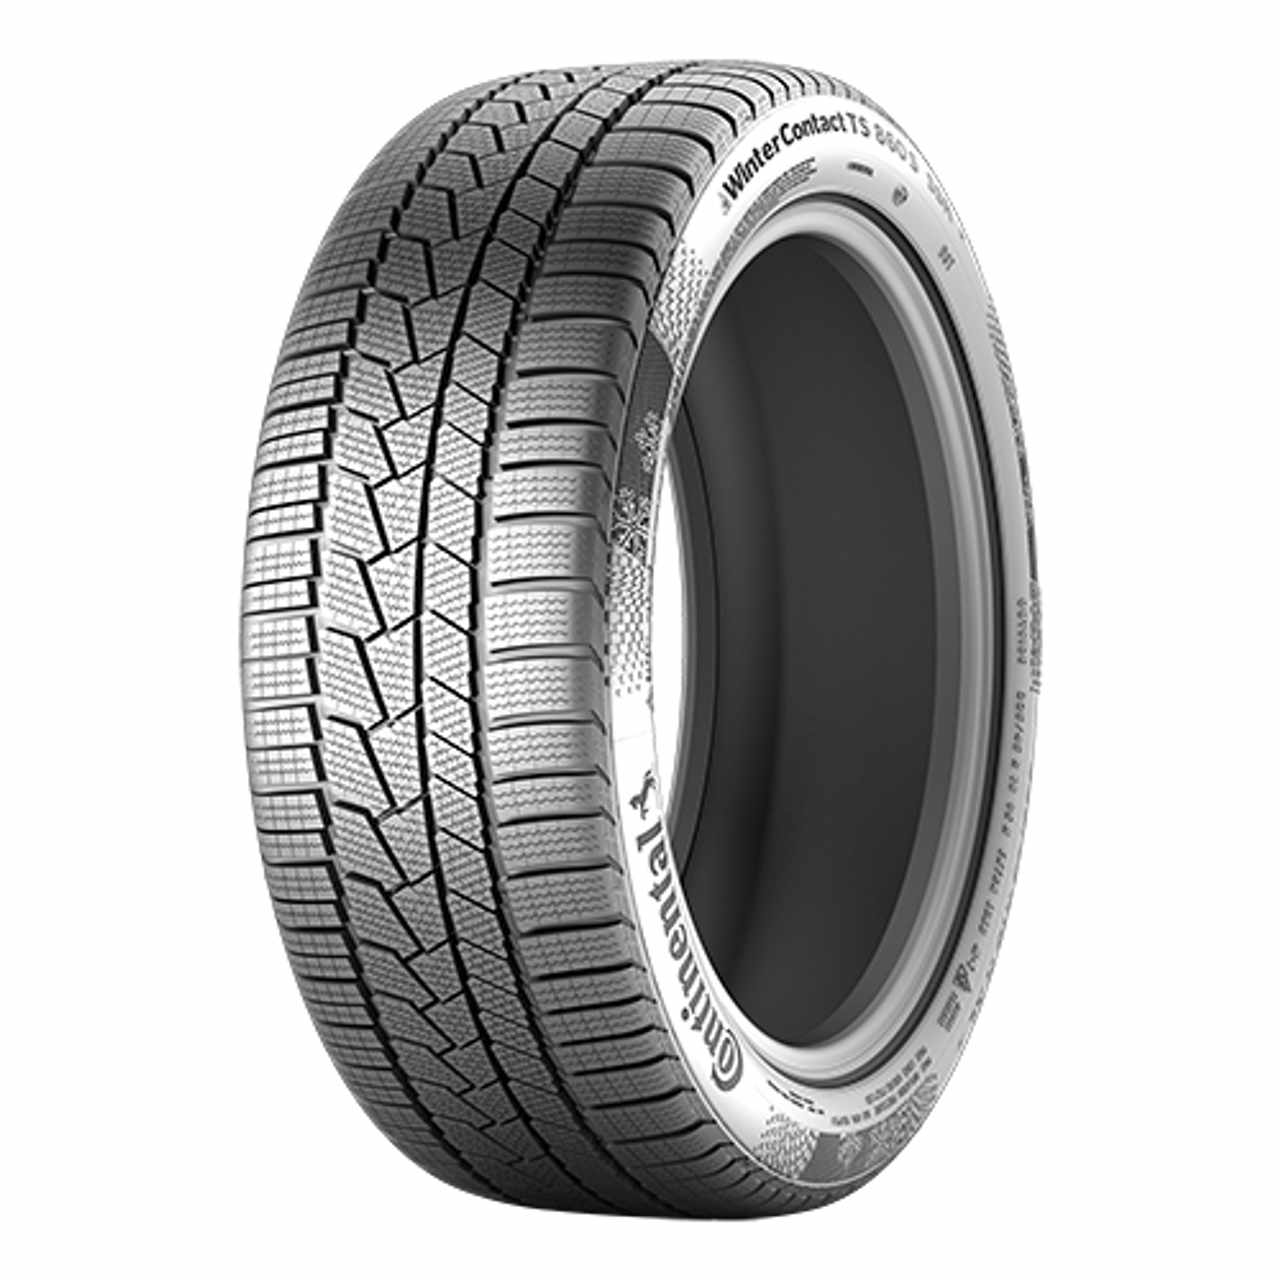 CONTINENTAL WINTERCONTACT TS 860 S (T0) (EVc) 235/45R18 98V FR BSW von Continental